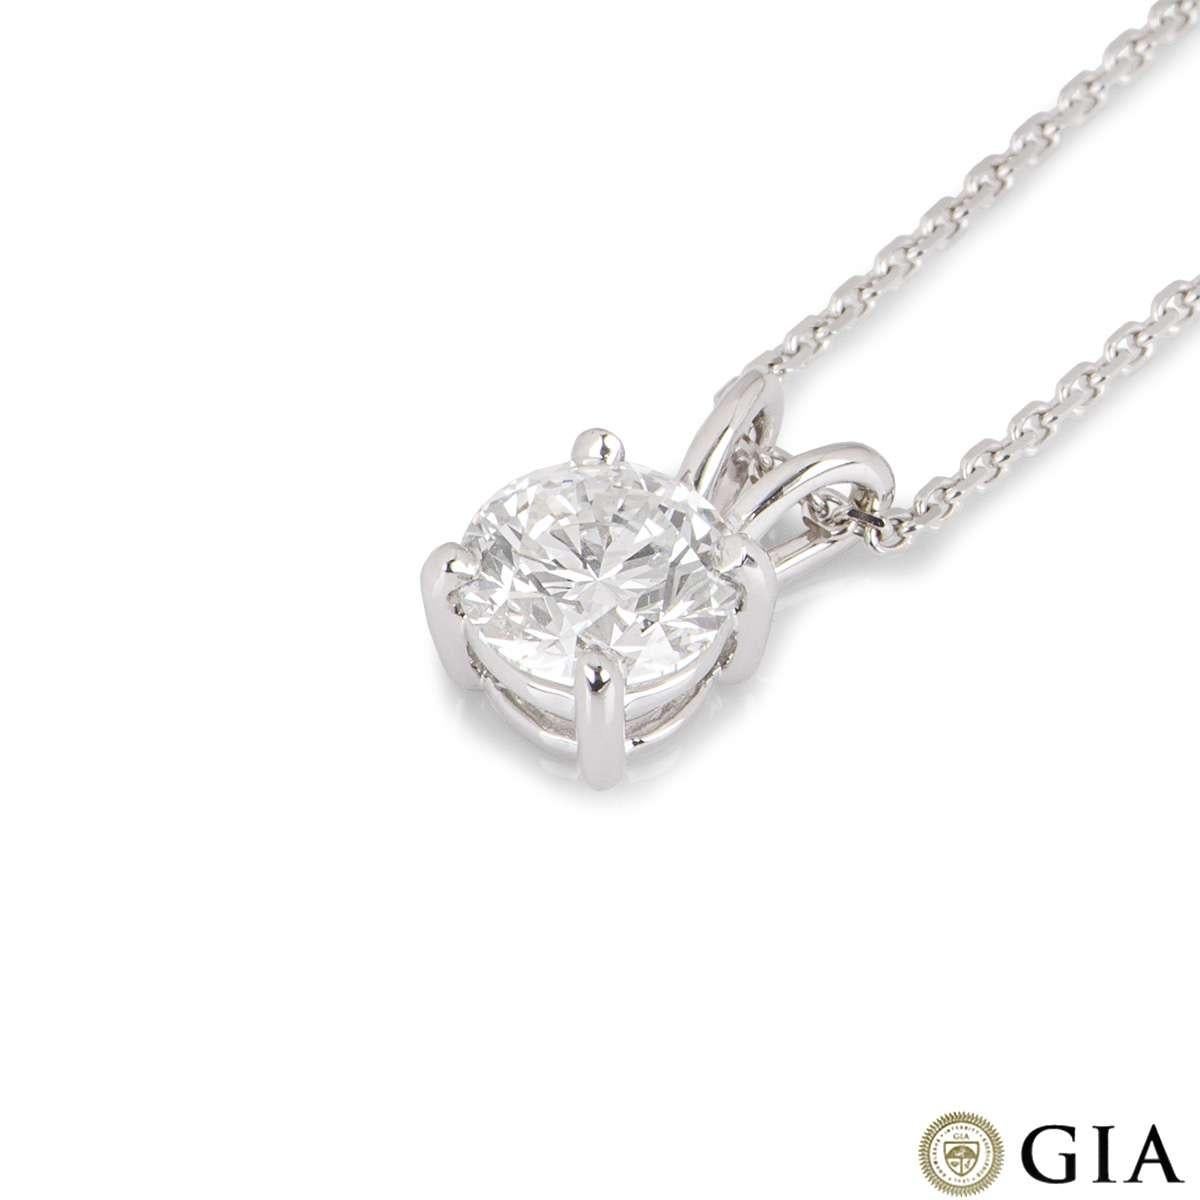 An 18k white gold diamond pendant. The pendant is set with a single round brilliant cut diamond weighing 1.23ct, F colour and SI1 clarity. The diamond scores an excellent rating in all three aspects for cut, polish and symmetry - this is known as a